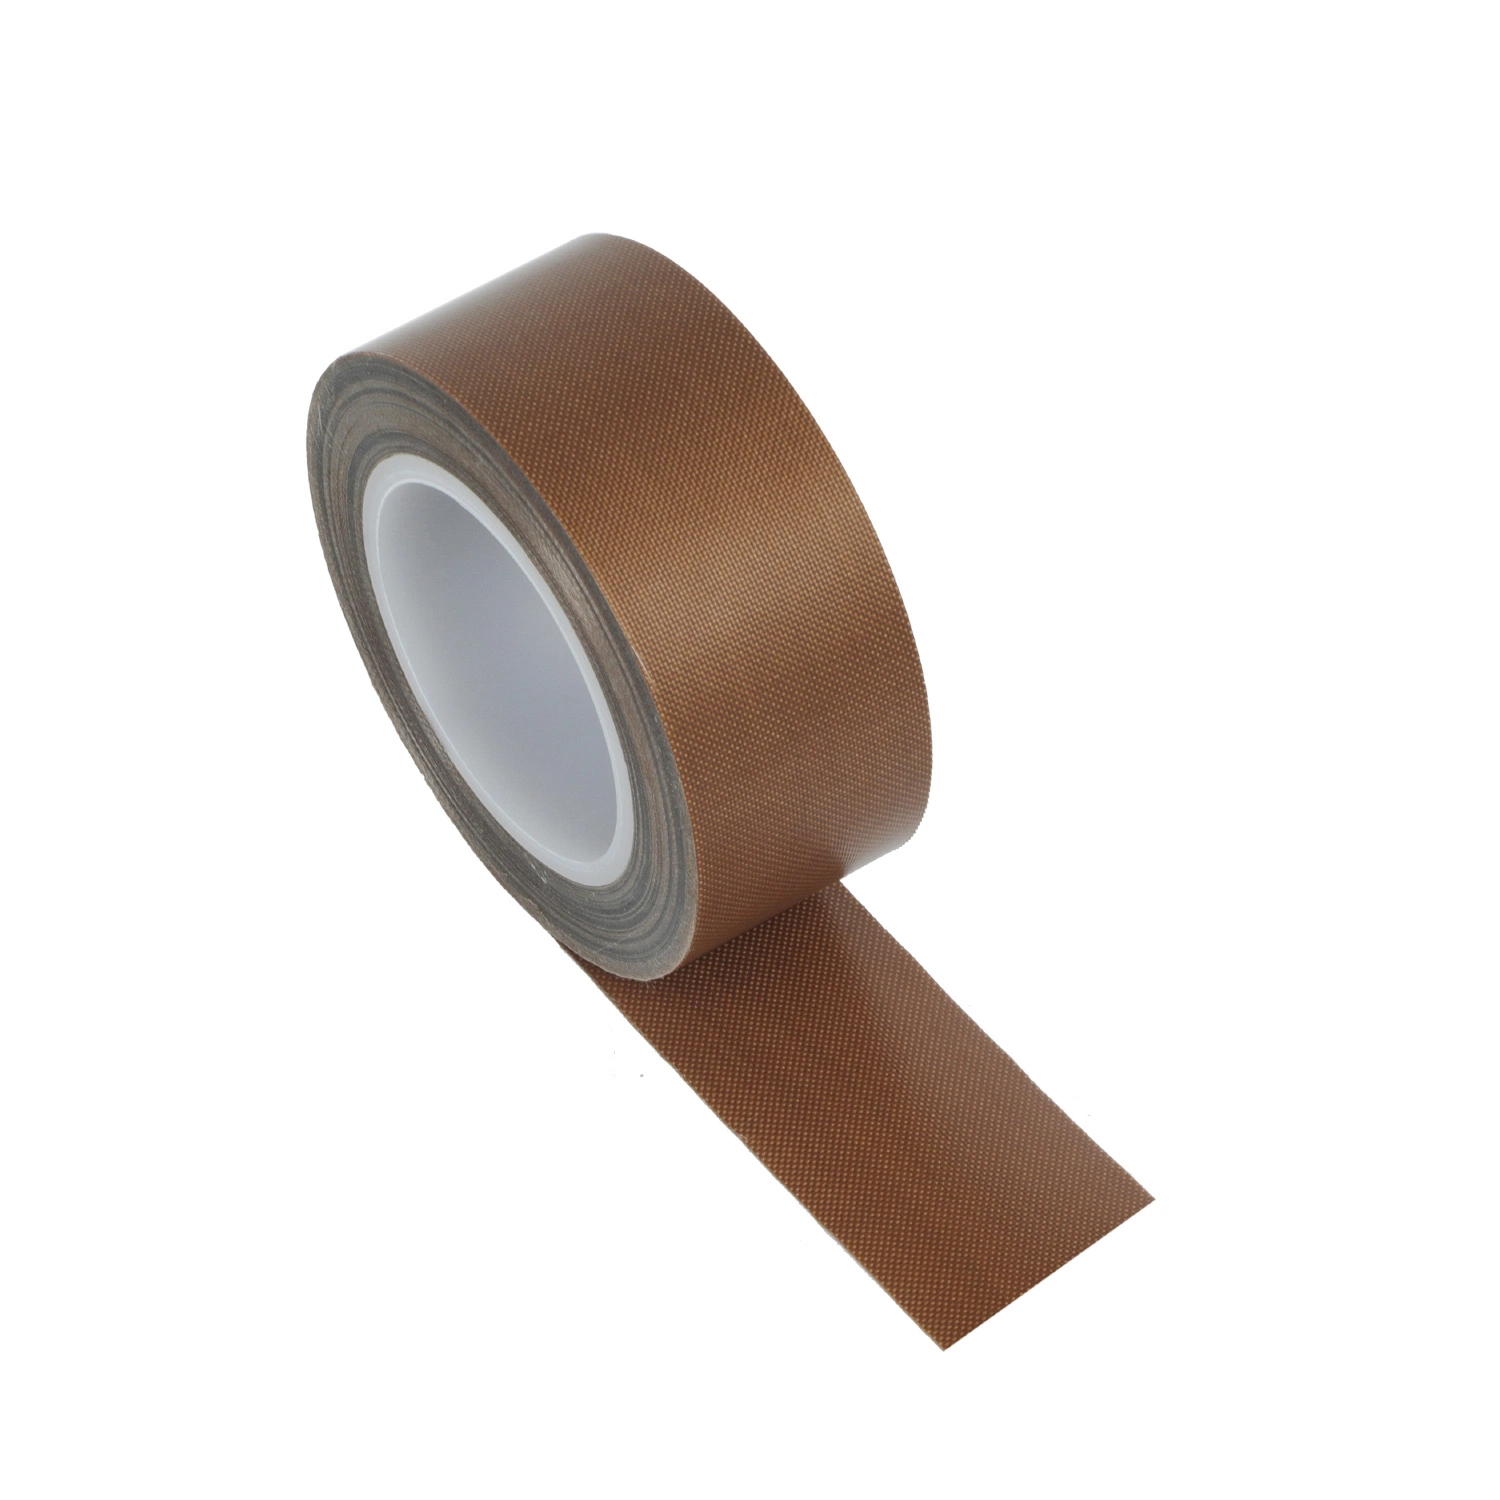 High Temperature Resistant PTFE Film Tape with Silicone Adhesive for Sealing